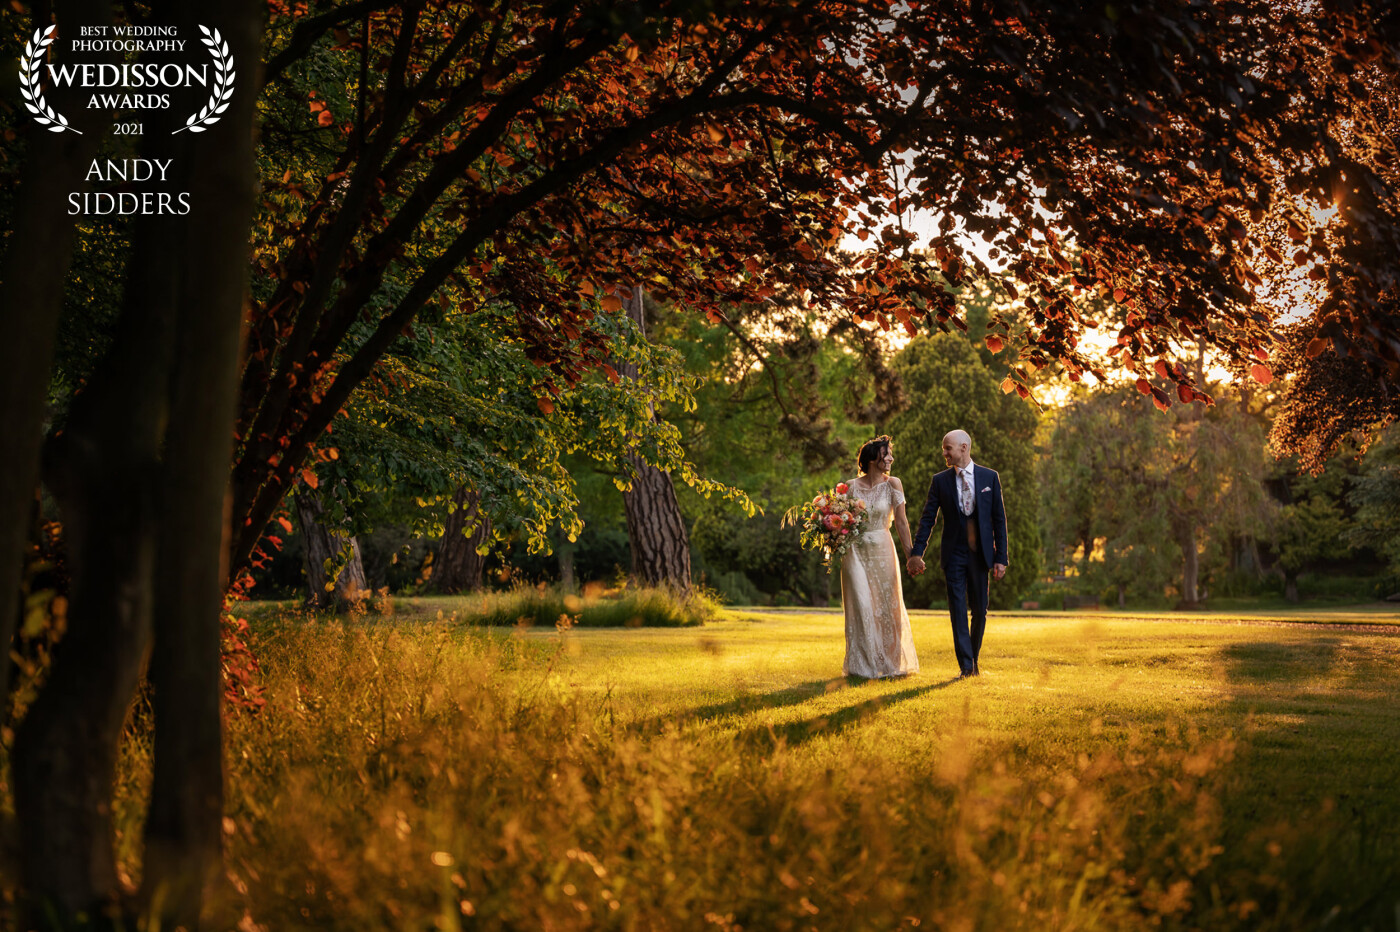 We were blessed with beautiful golden hour light for Alison and Jonny's wedding at Fanhams Hall. Here's a shot of the newlyweds backlit by the golden light.